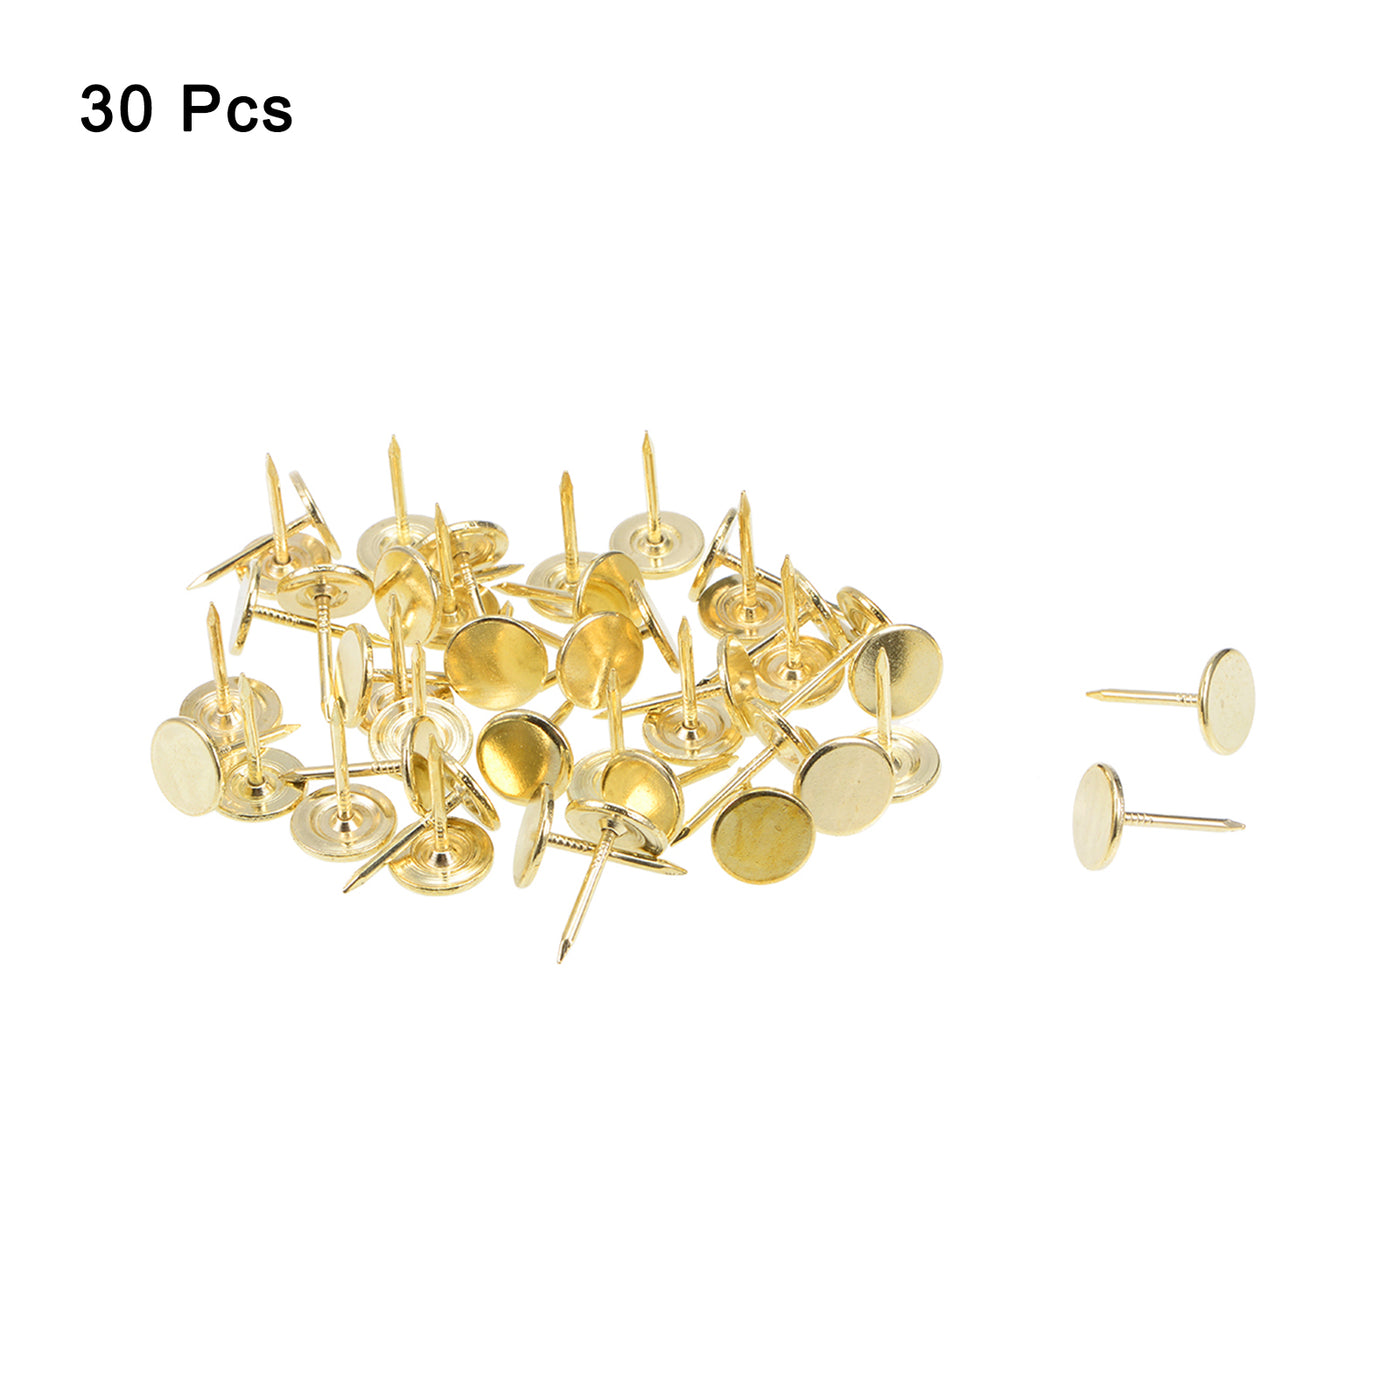 uxcell Uxcell 30Pcs 11mmx17mm Flat Head Decorative Upholstery Tacks Furniture Nails, Gold